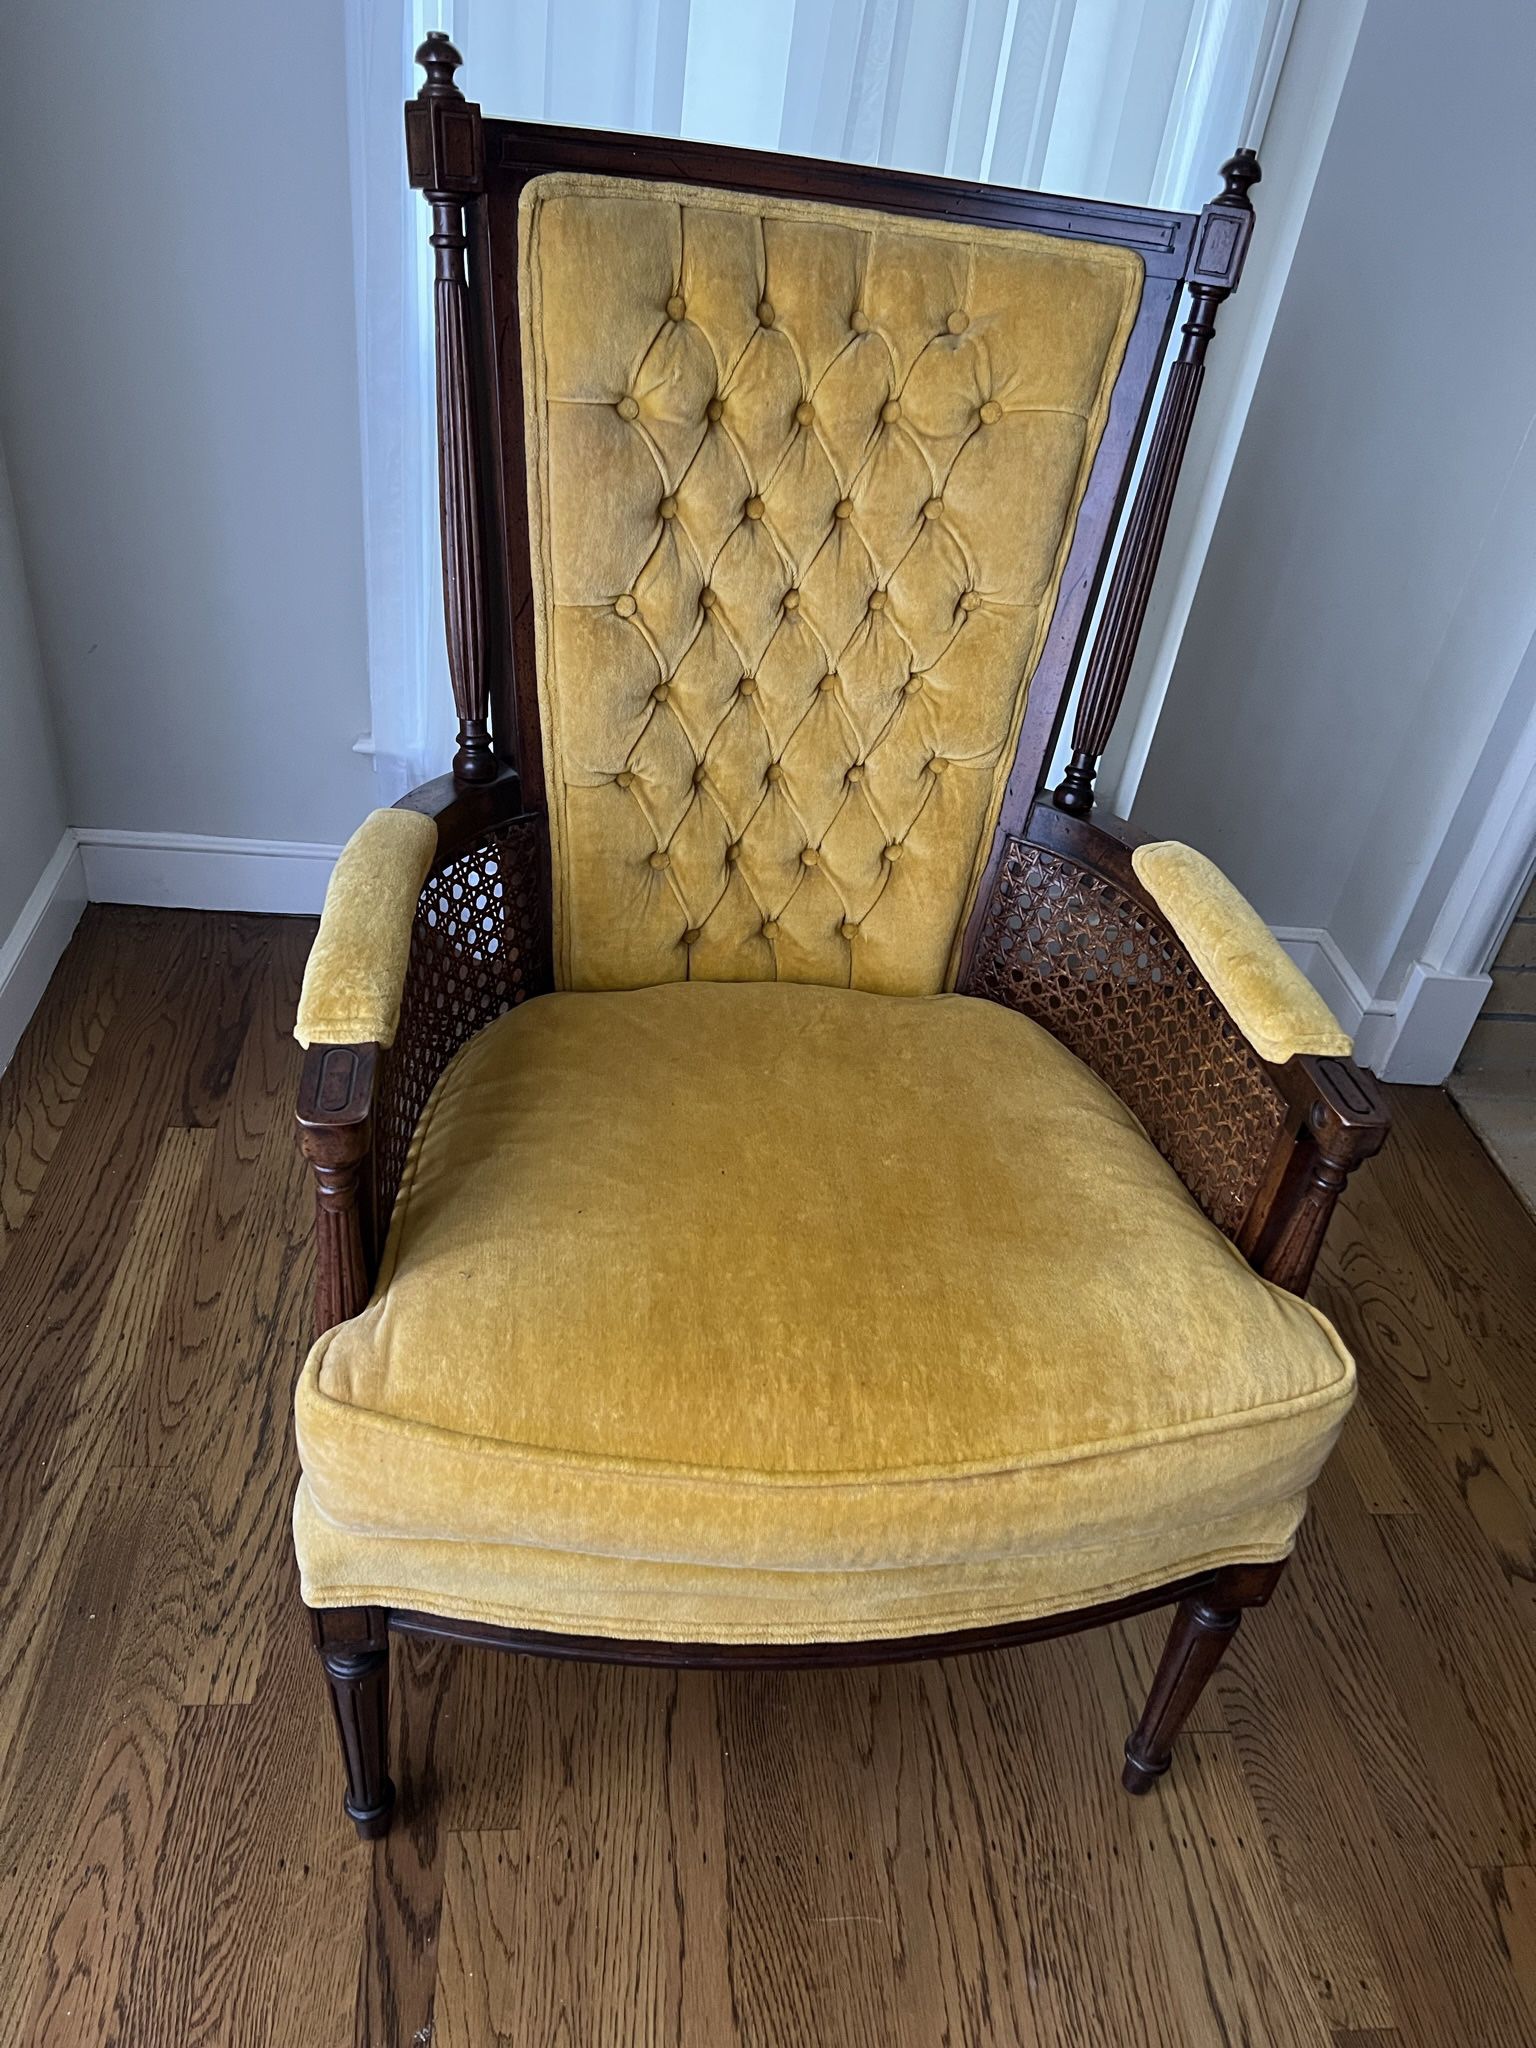 Vintage library chair